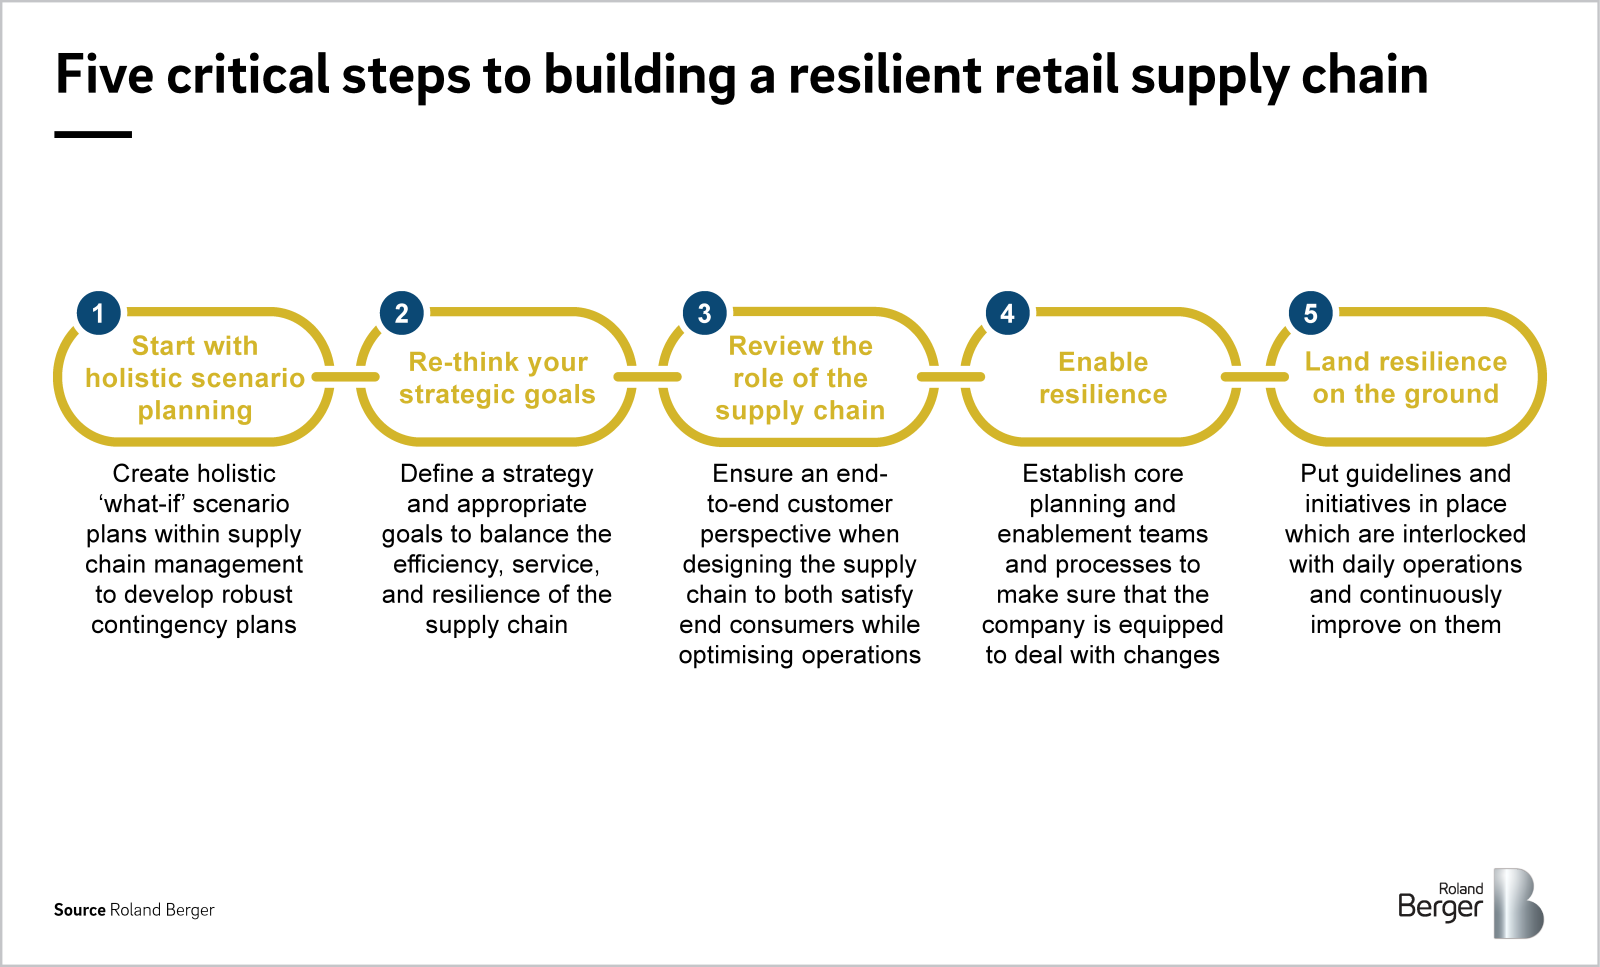 The Most Resilient Category in Retail